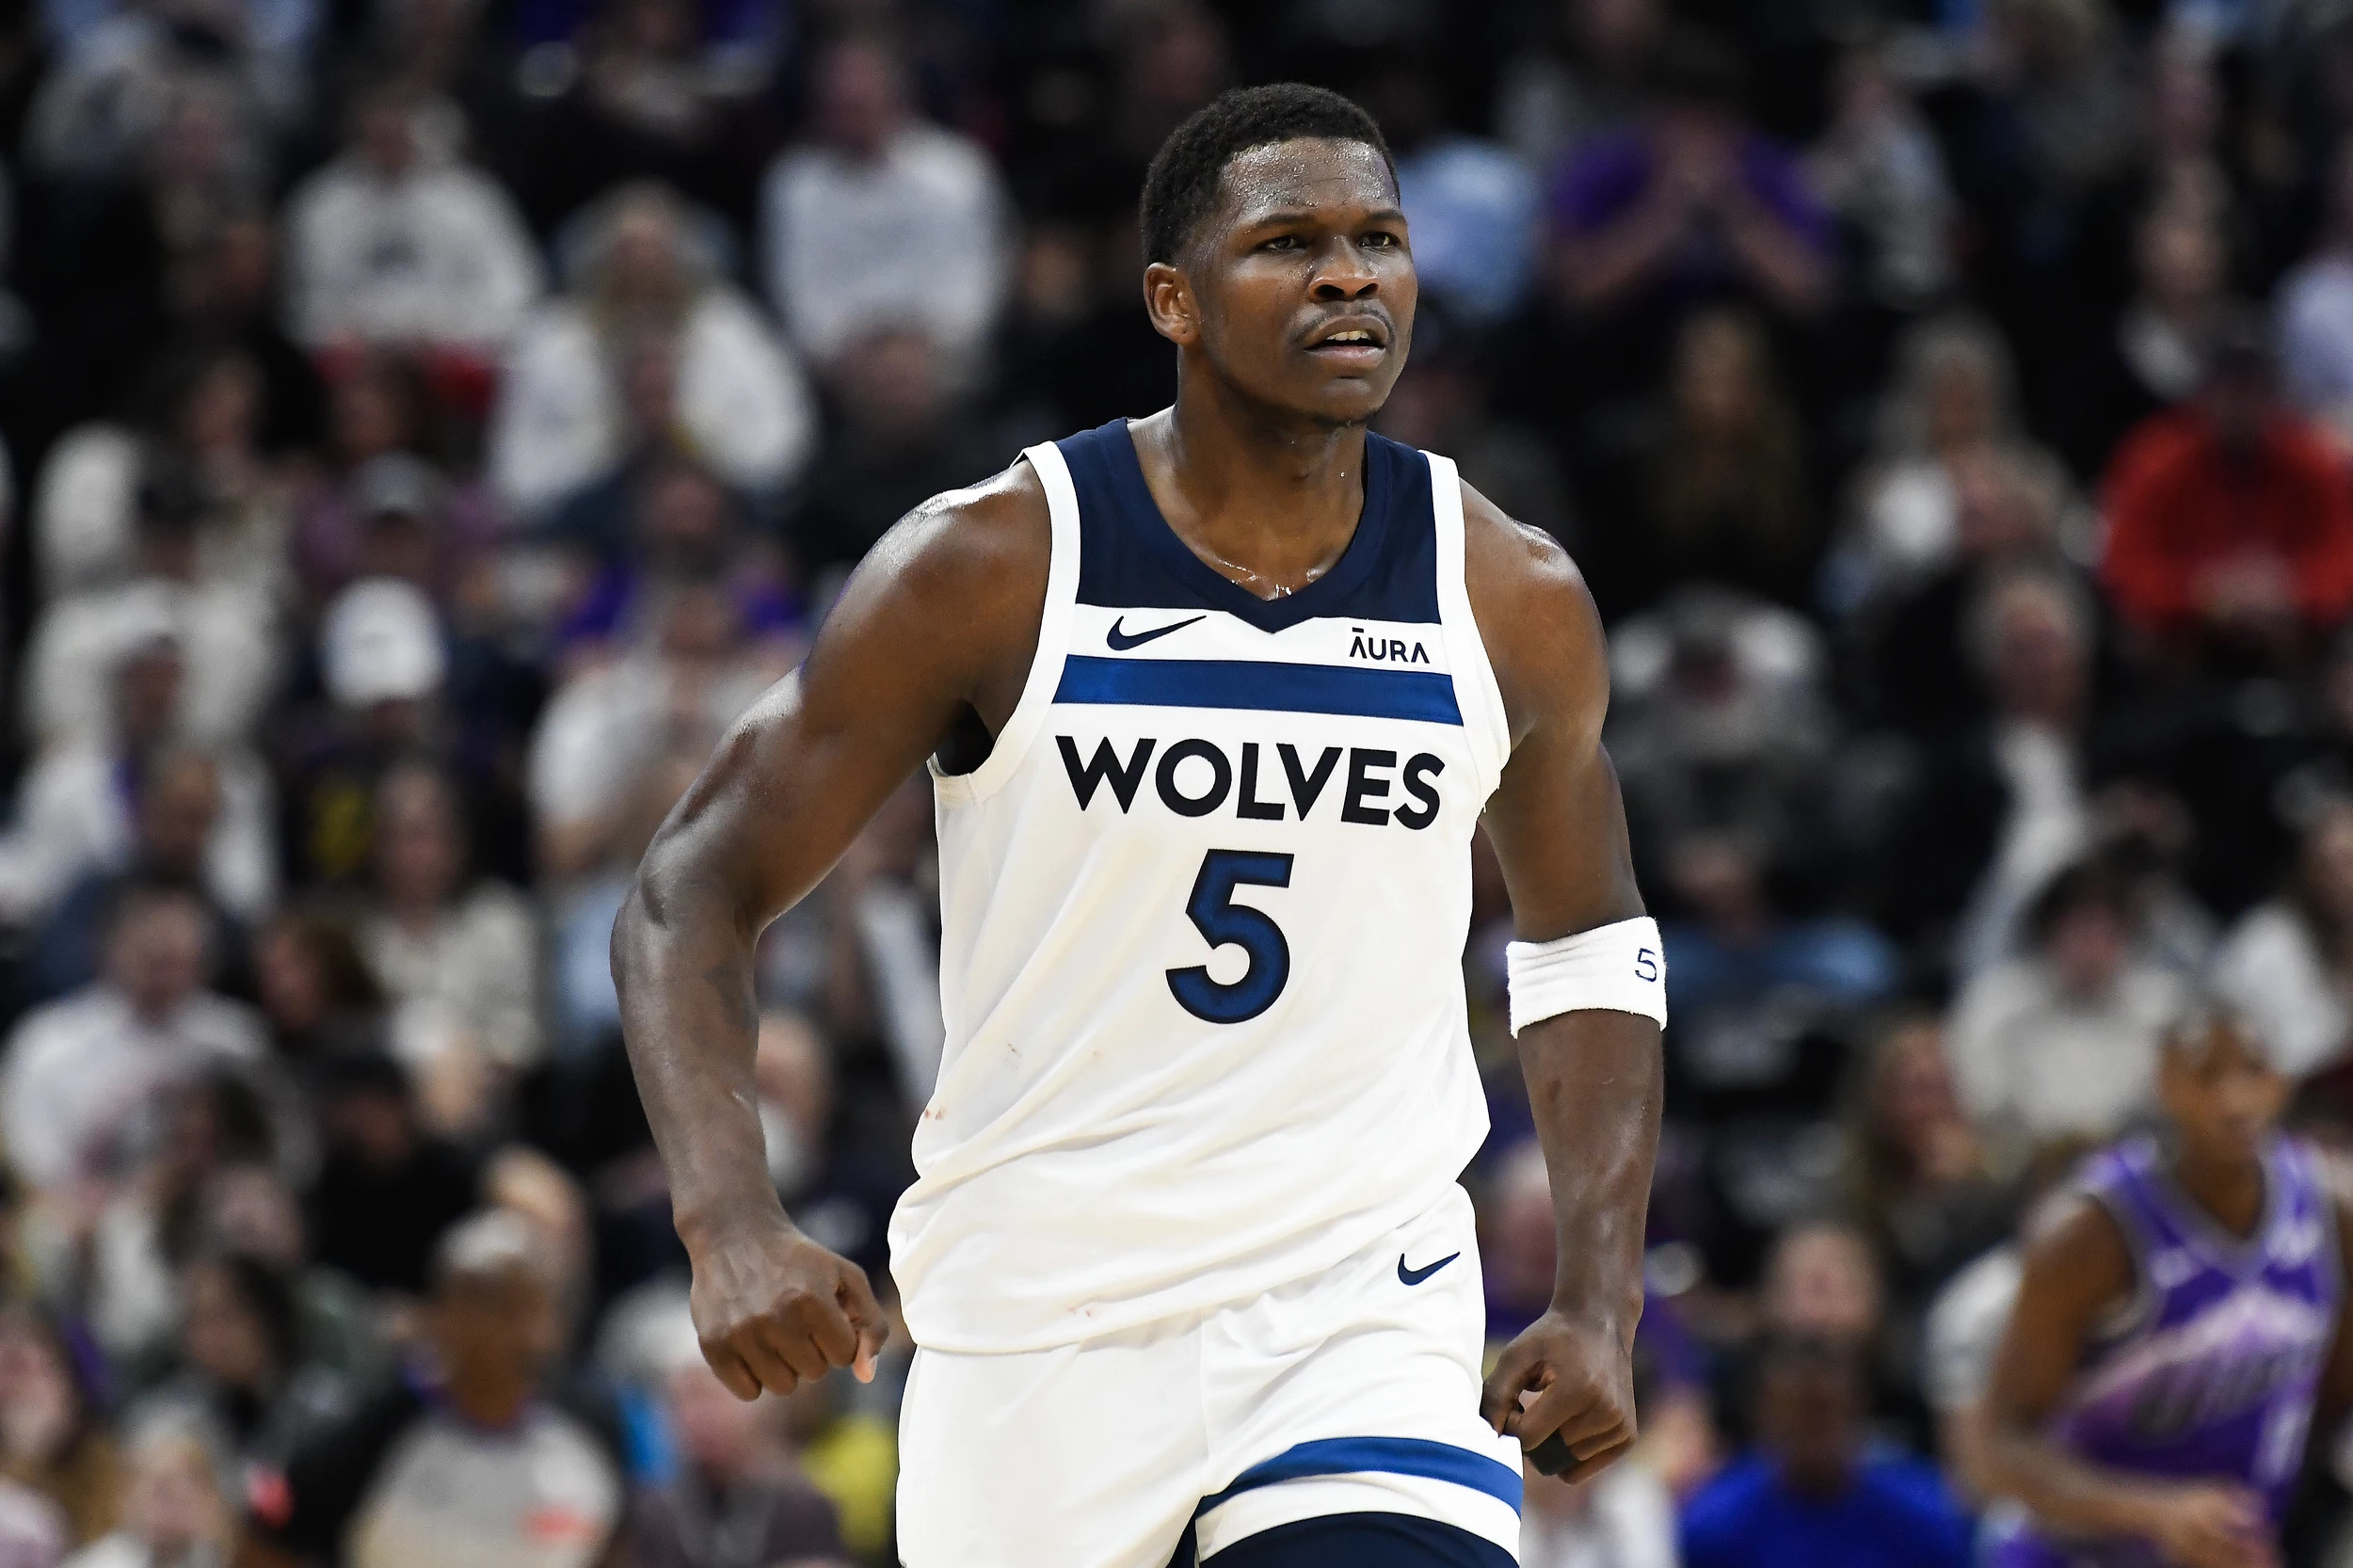 Deal to Sell Minnesota Timberwolves is Off